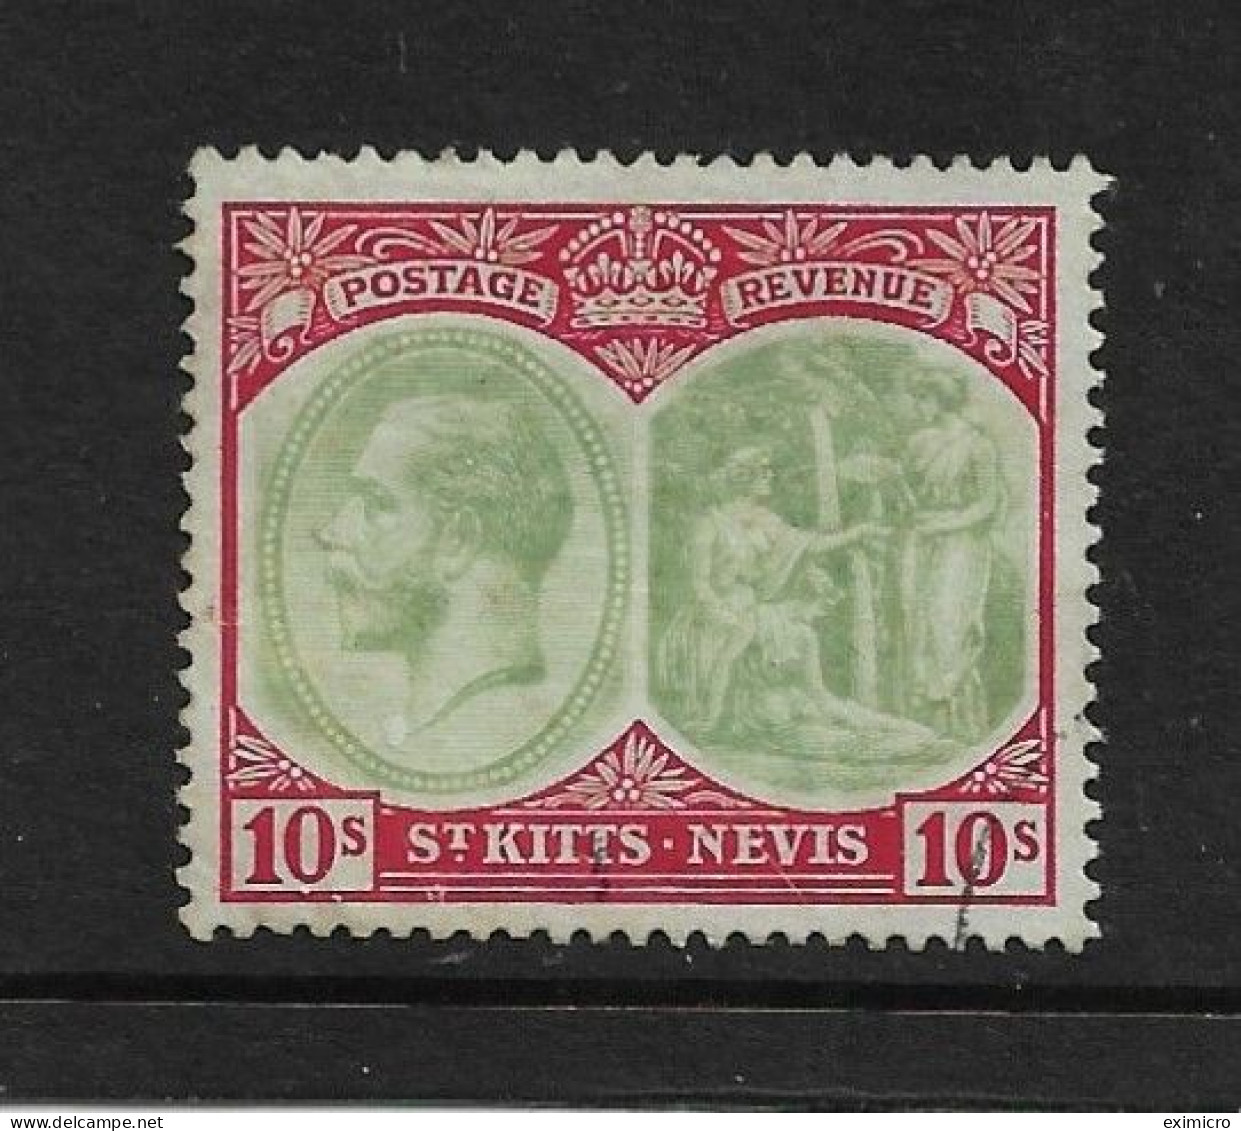 ST. KITTS - NEVIS 1920 - 1922 WATERMARK MULTIPLE CROWN CA 10s SG 35 FINE USED Cat £48 - St.Christopher-Nevis & Anguilla (...-1980)